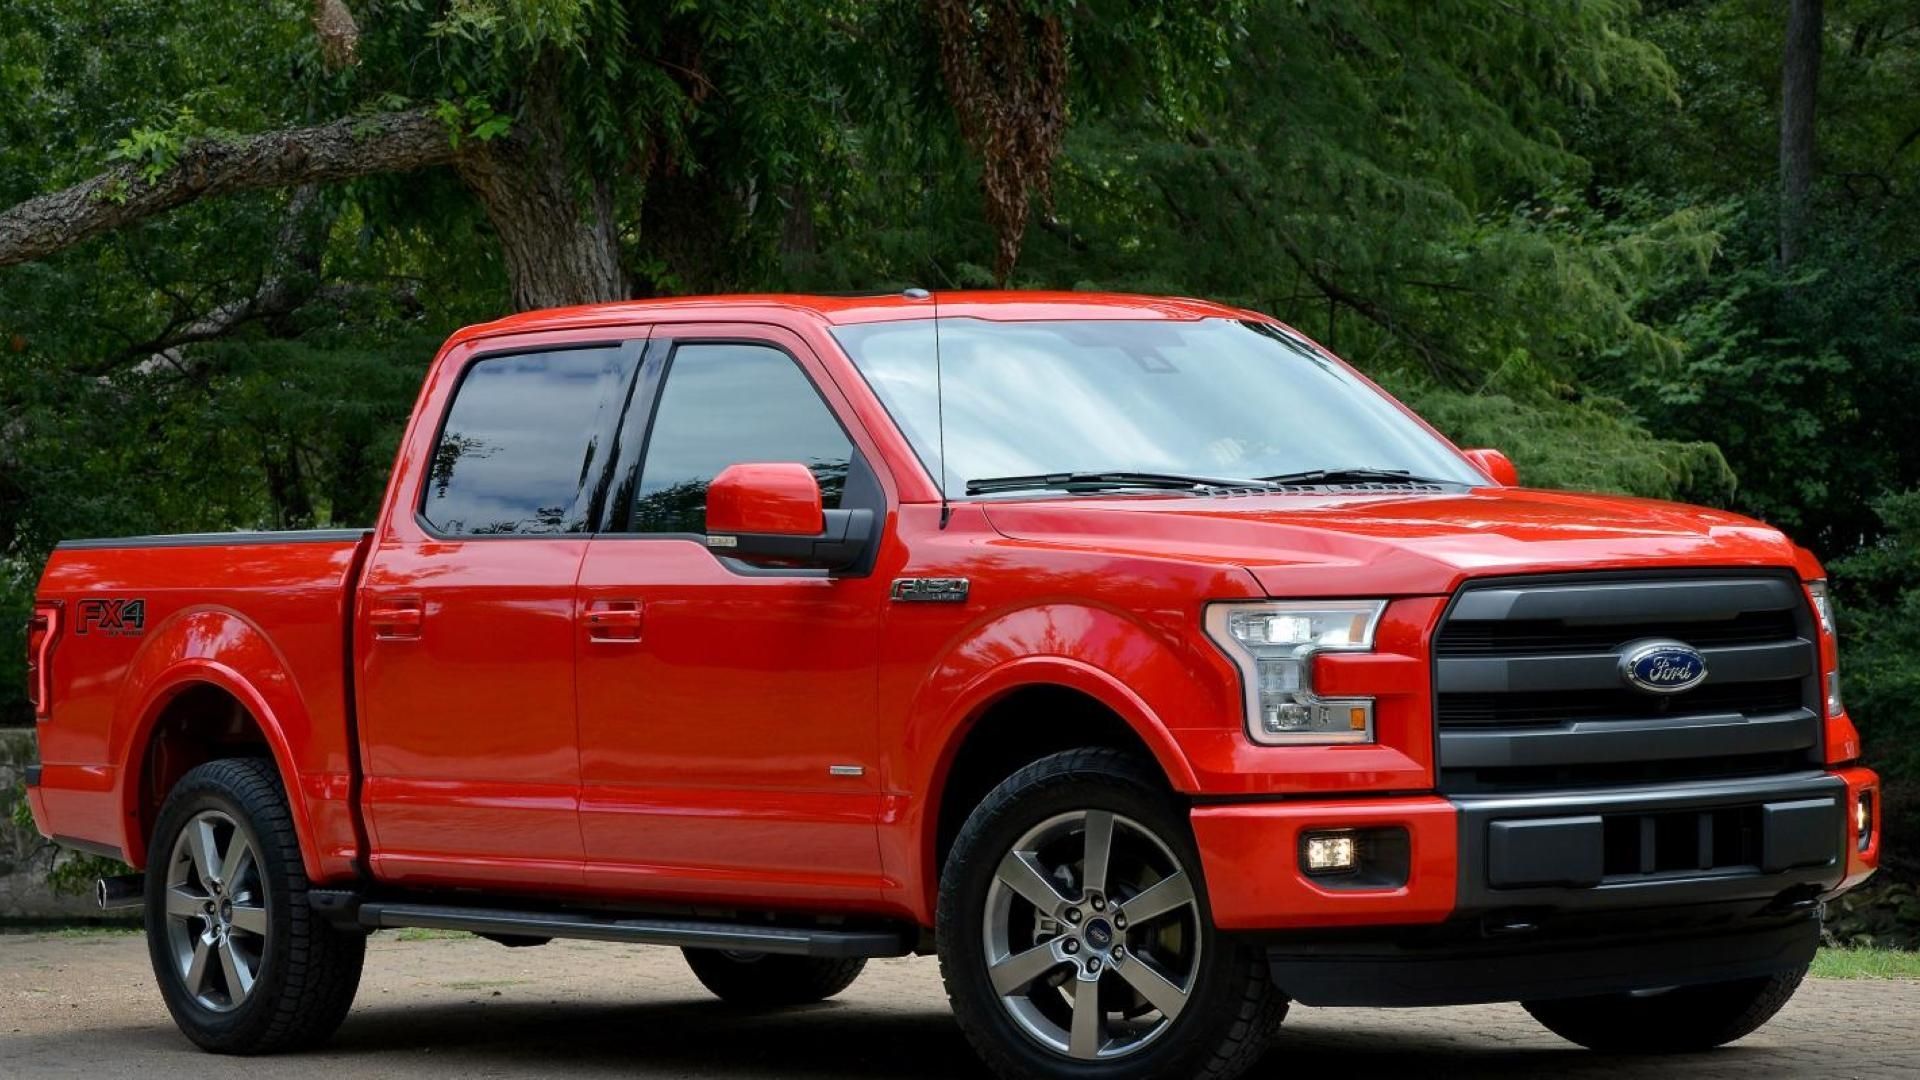 2015 Ford F-150 FX4 - Front Angle